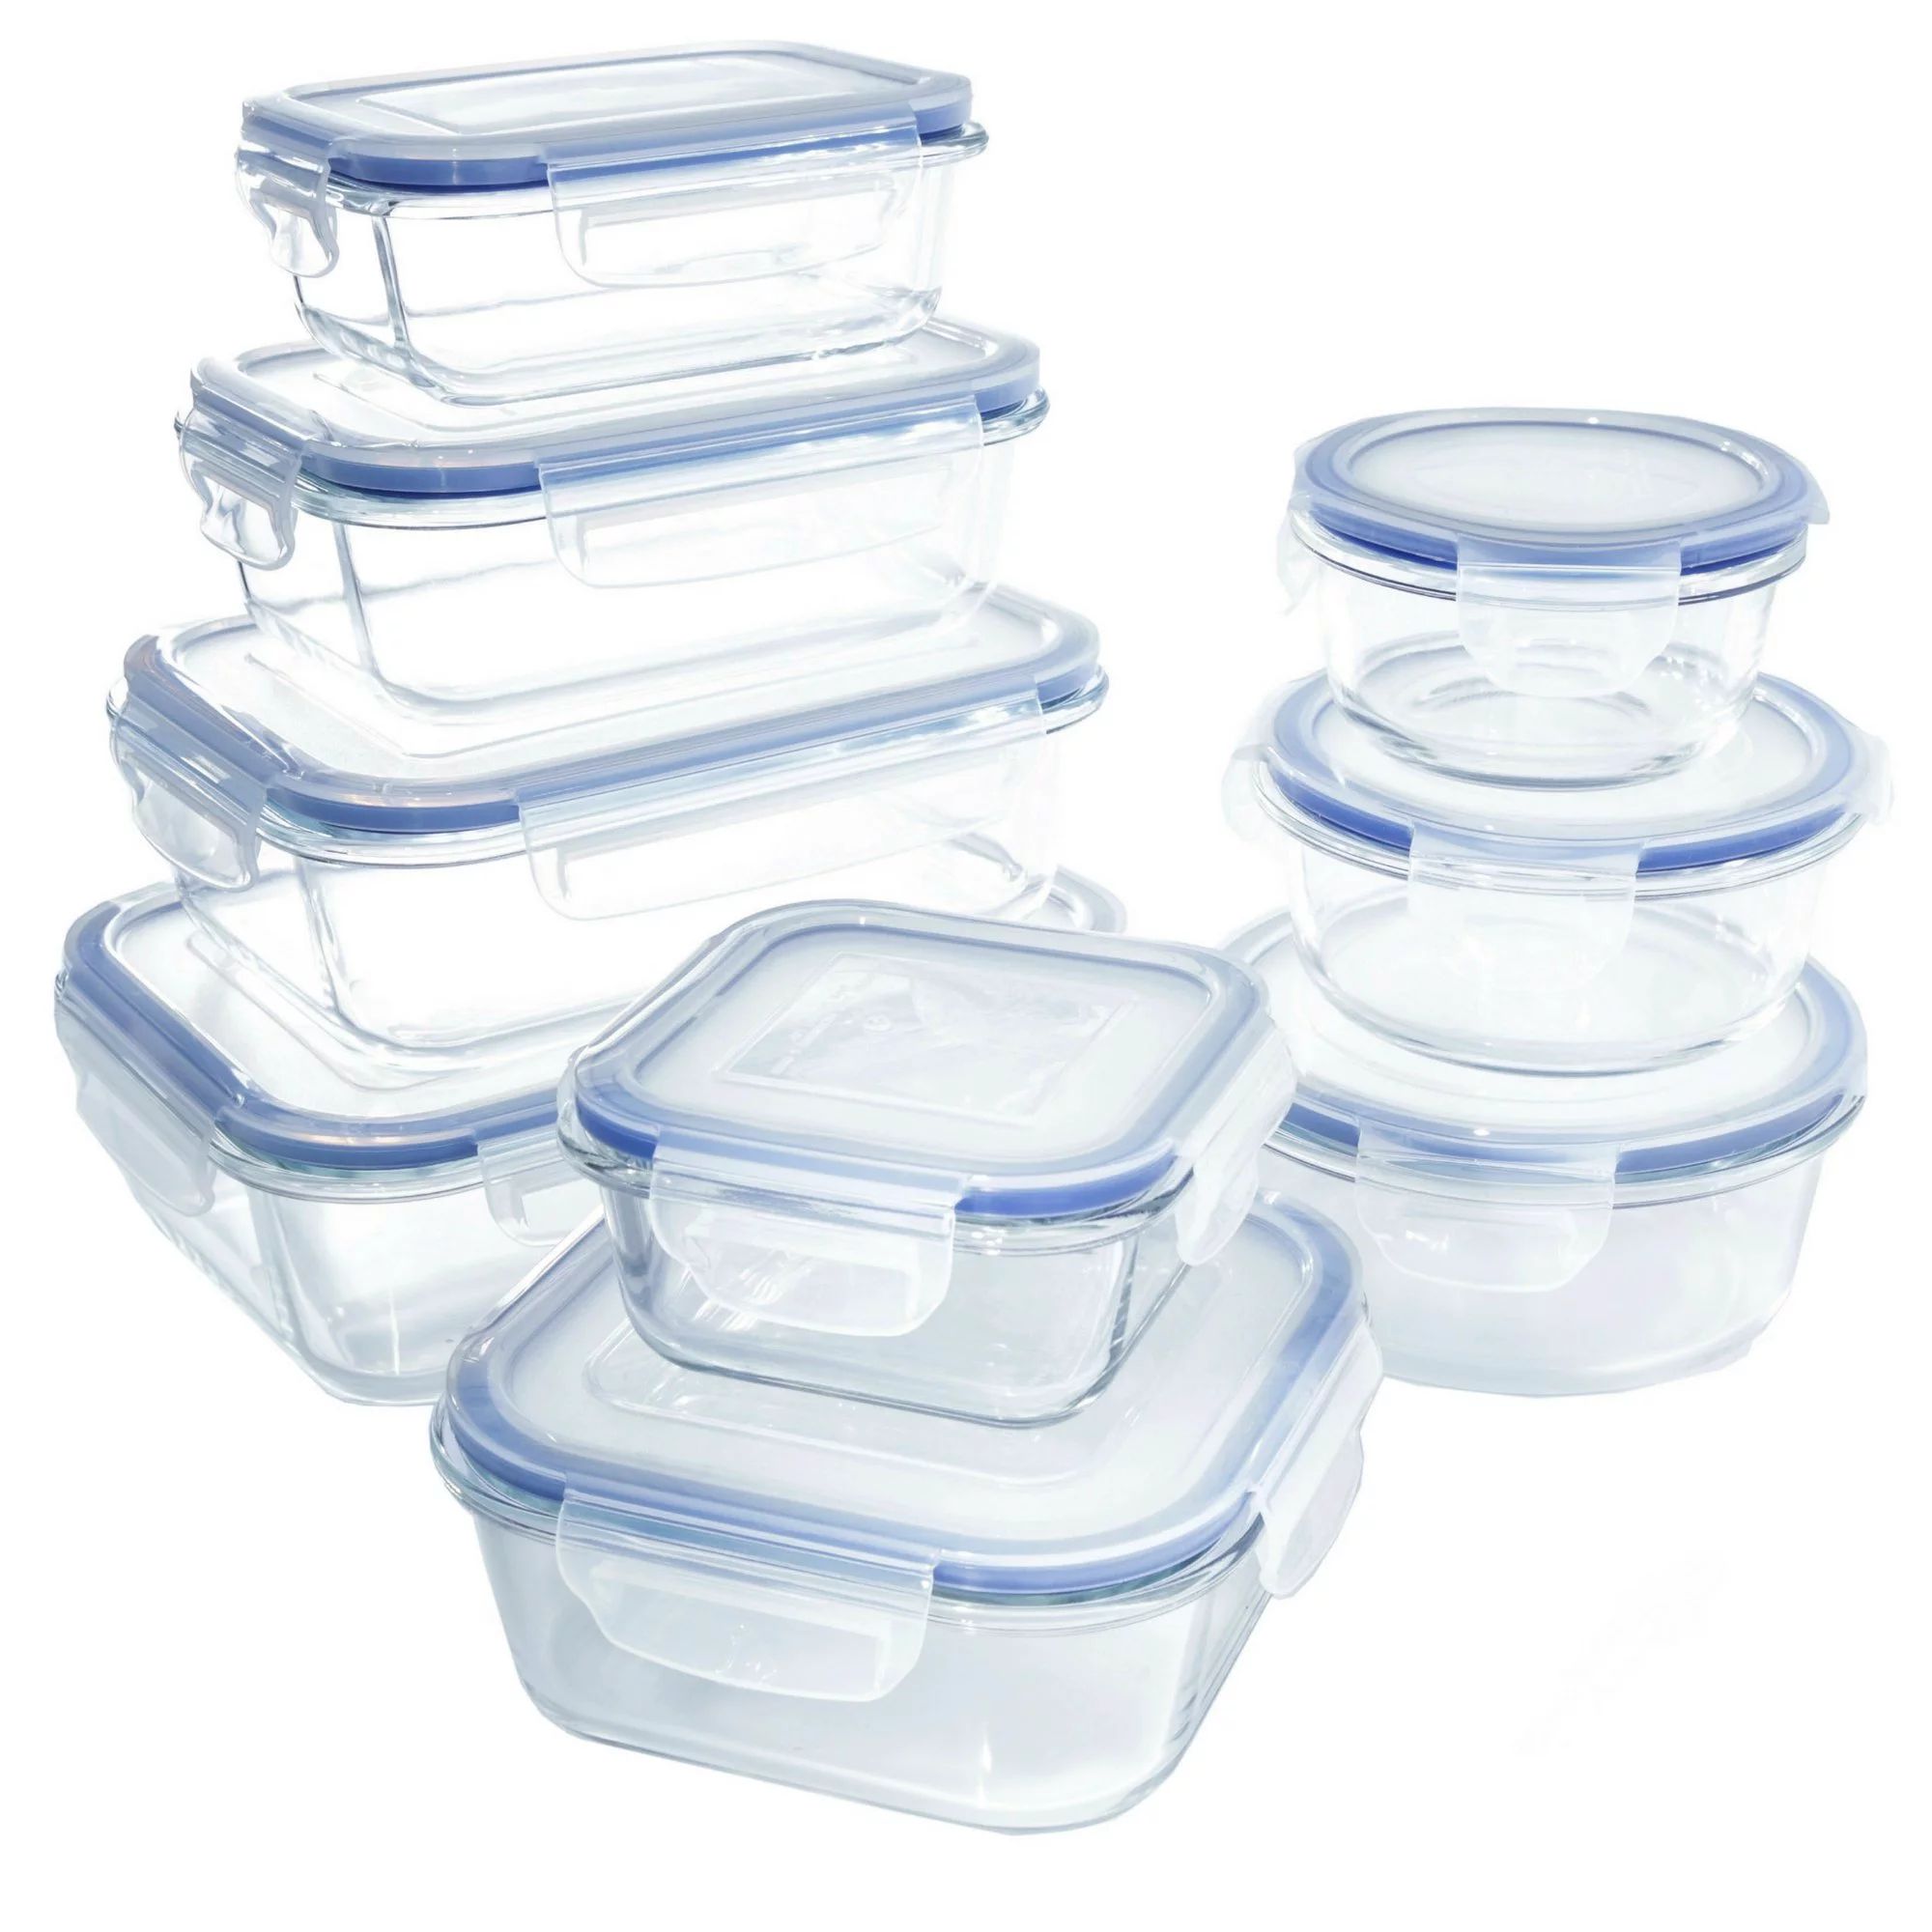 18 piece Glass Food Container Set with Locking Lids - BPA Free - Dishwasher, Oven, Microwave Safe | Walmart (US)